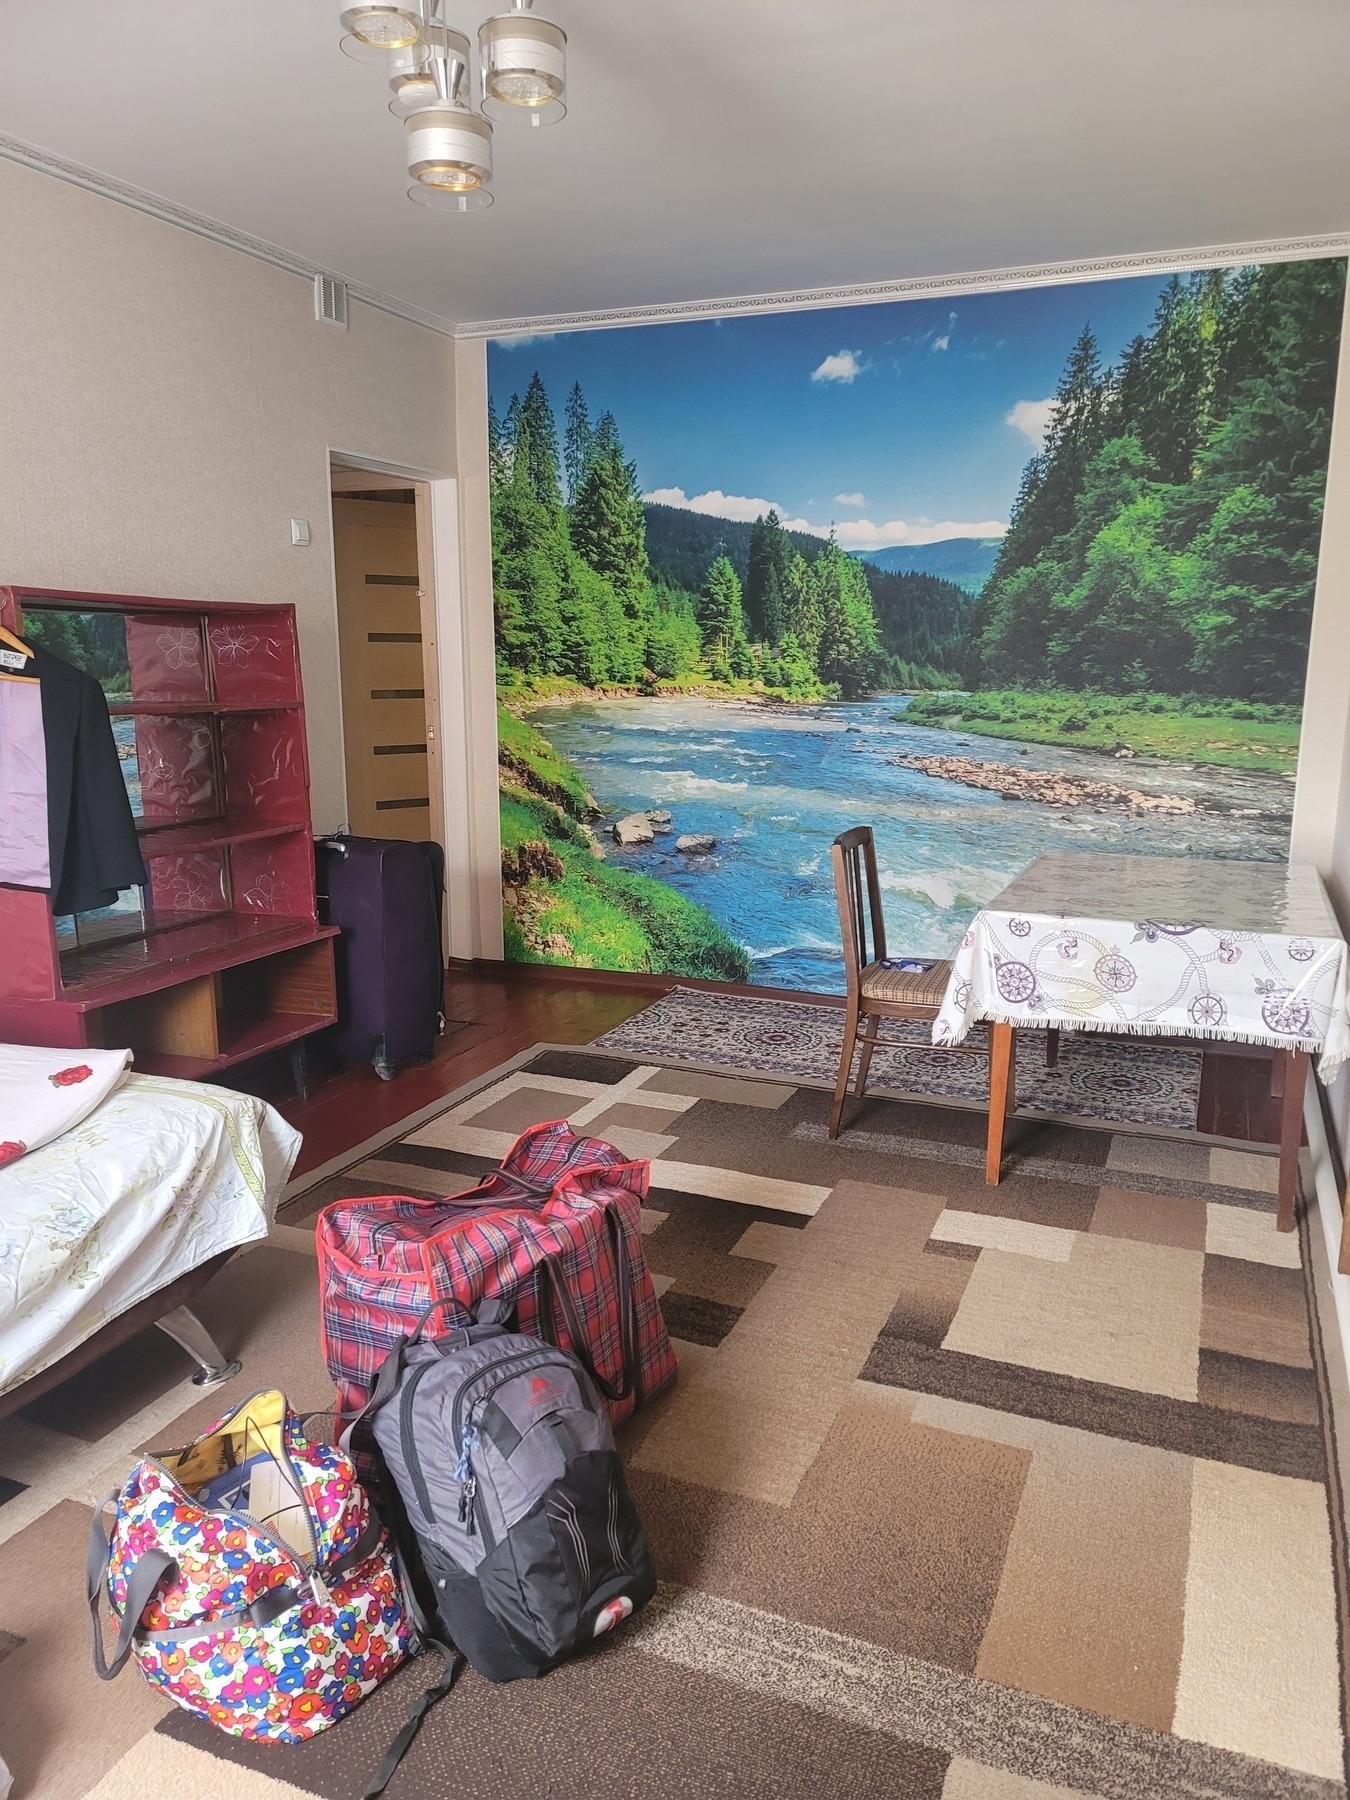 large bedroom with a river in forest wall mural on the back wall. shelf and bed on the left side of the room and a table and chair on the right side